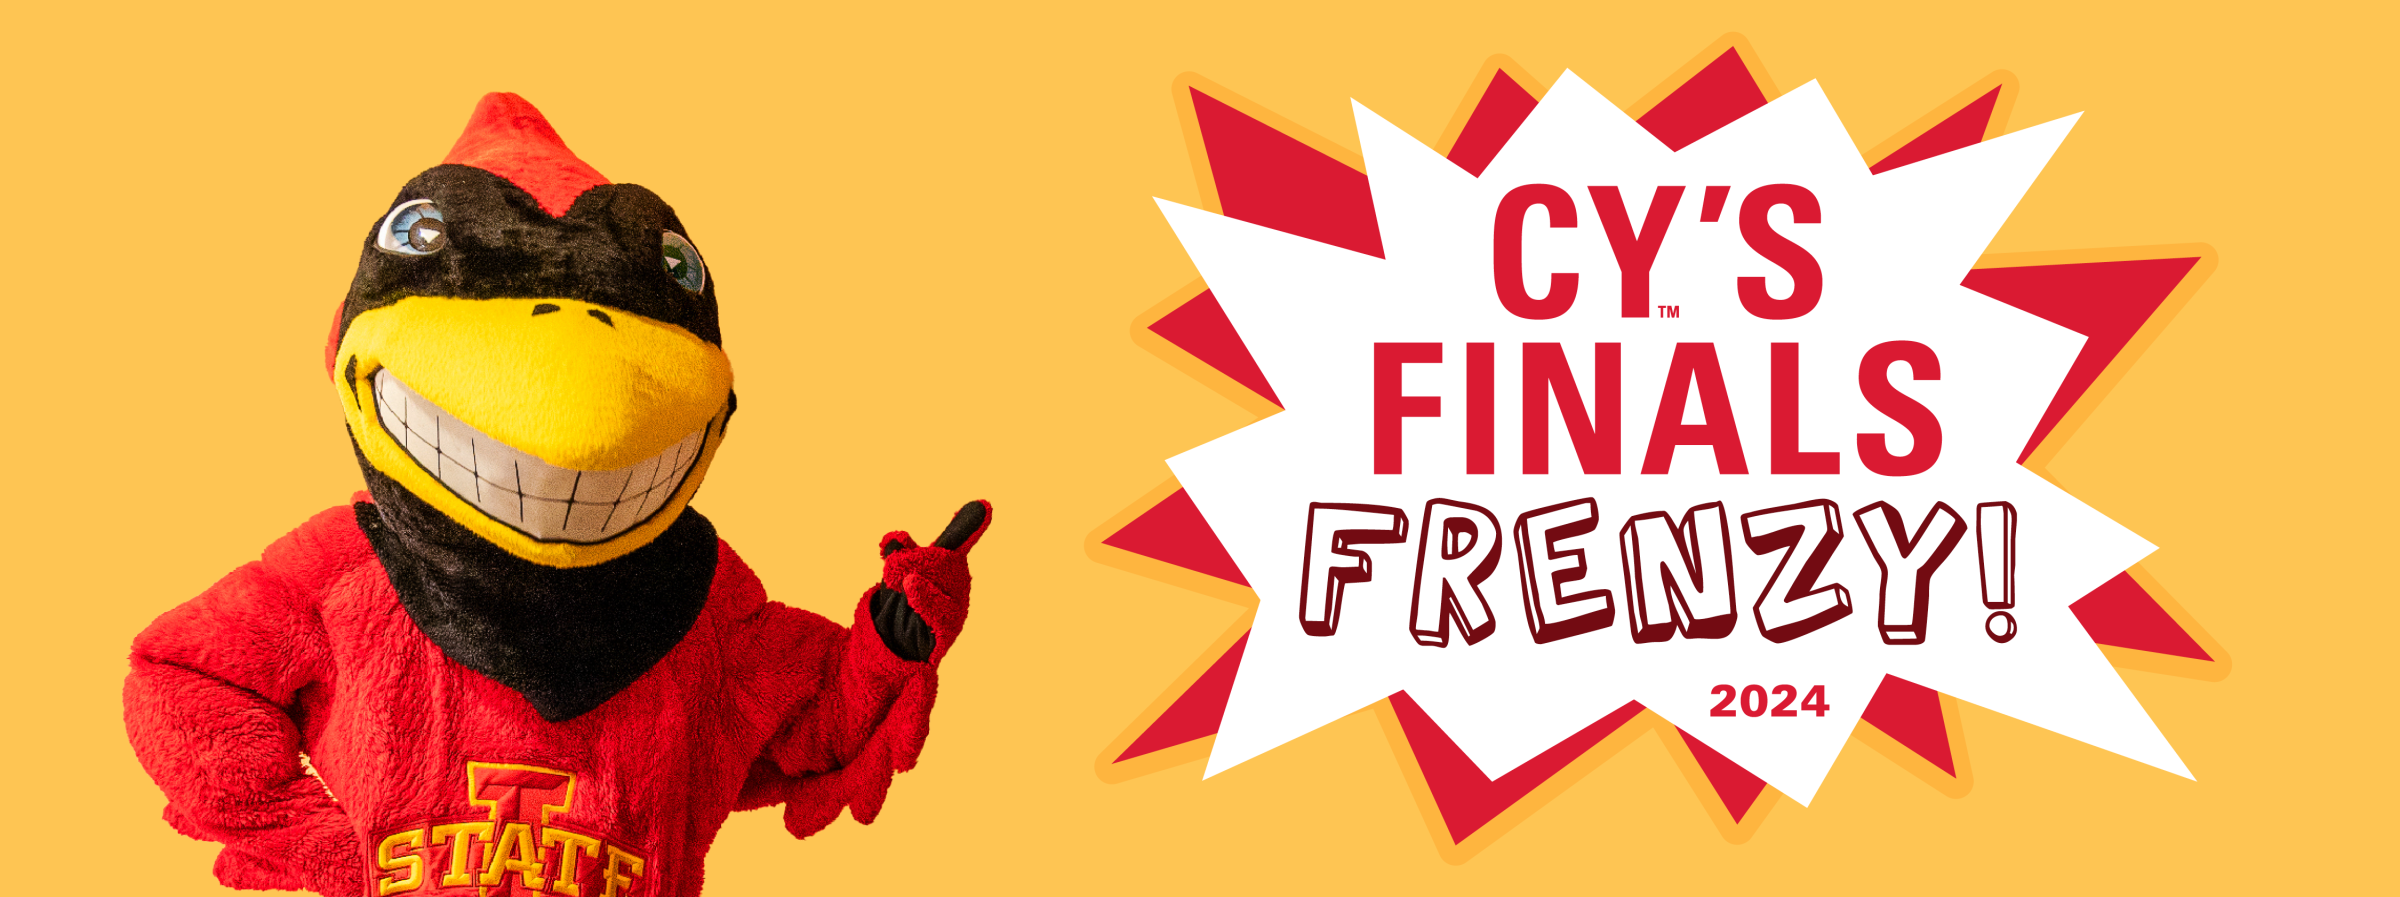 Cy pointing to "Cy's Finals Frenzy" logo on a Red Background